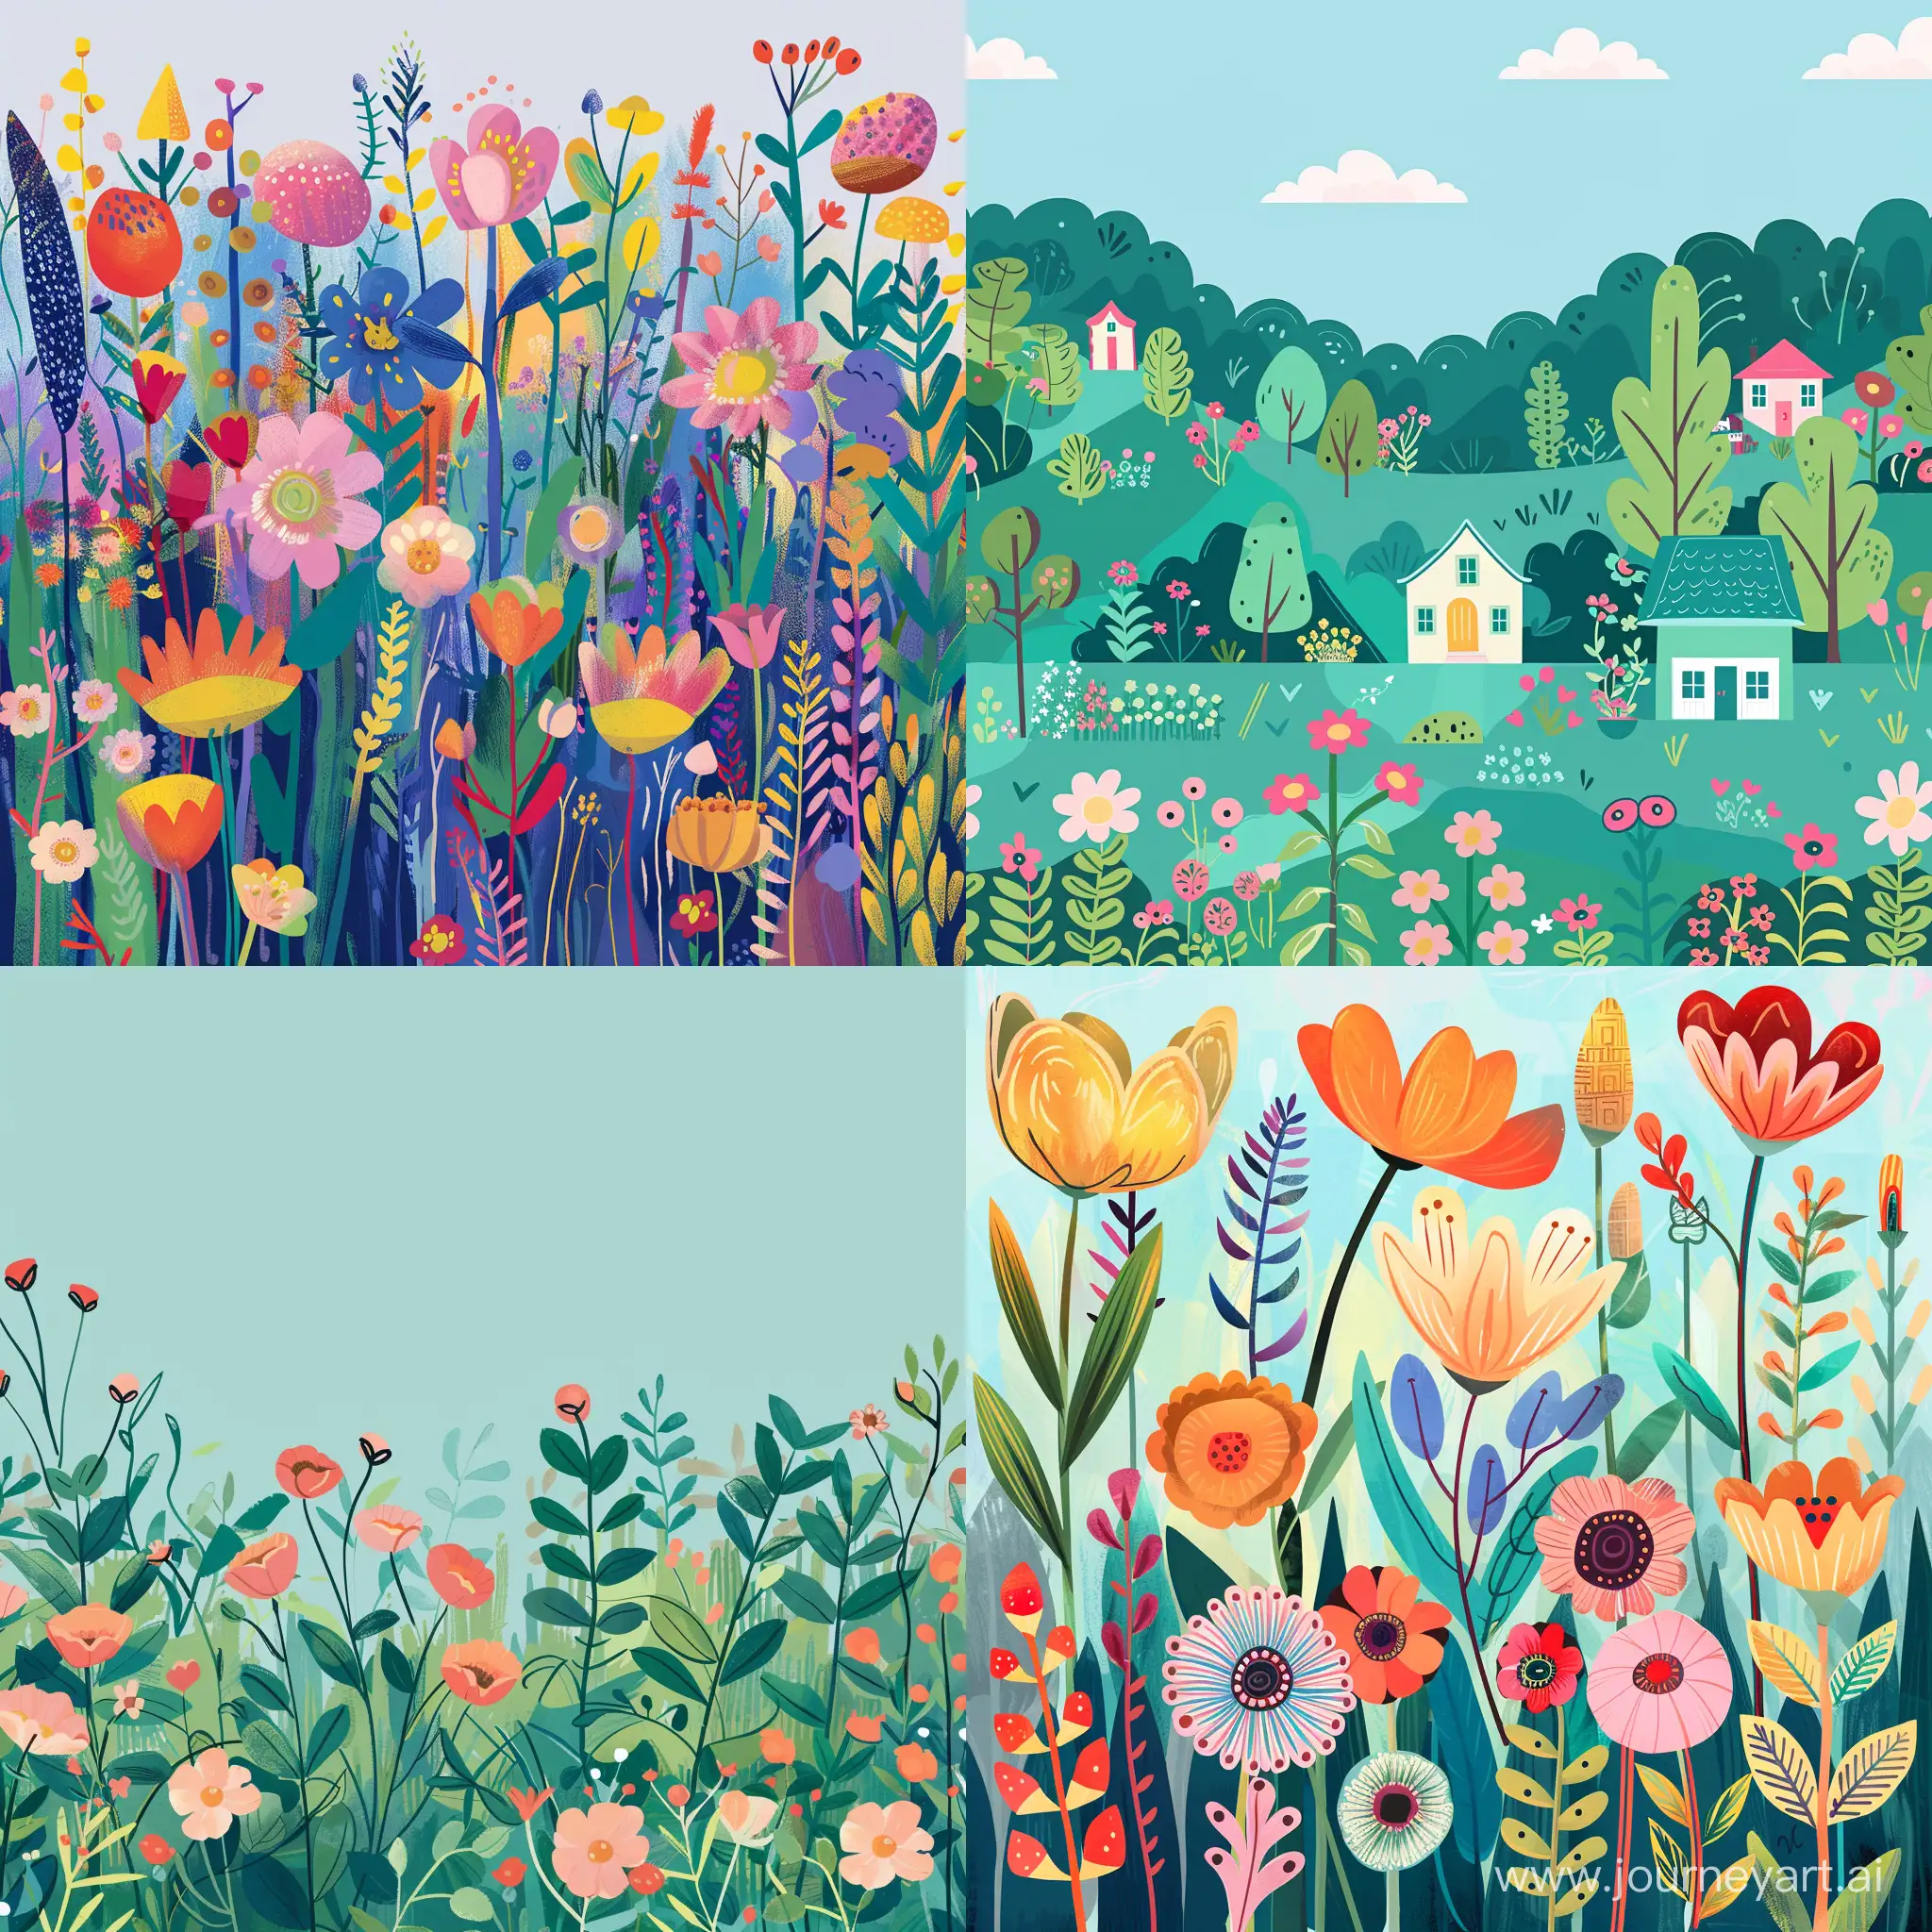 Whimsical-Painted-Garden-Background-Papers-HighQuality-Flat-Illustration